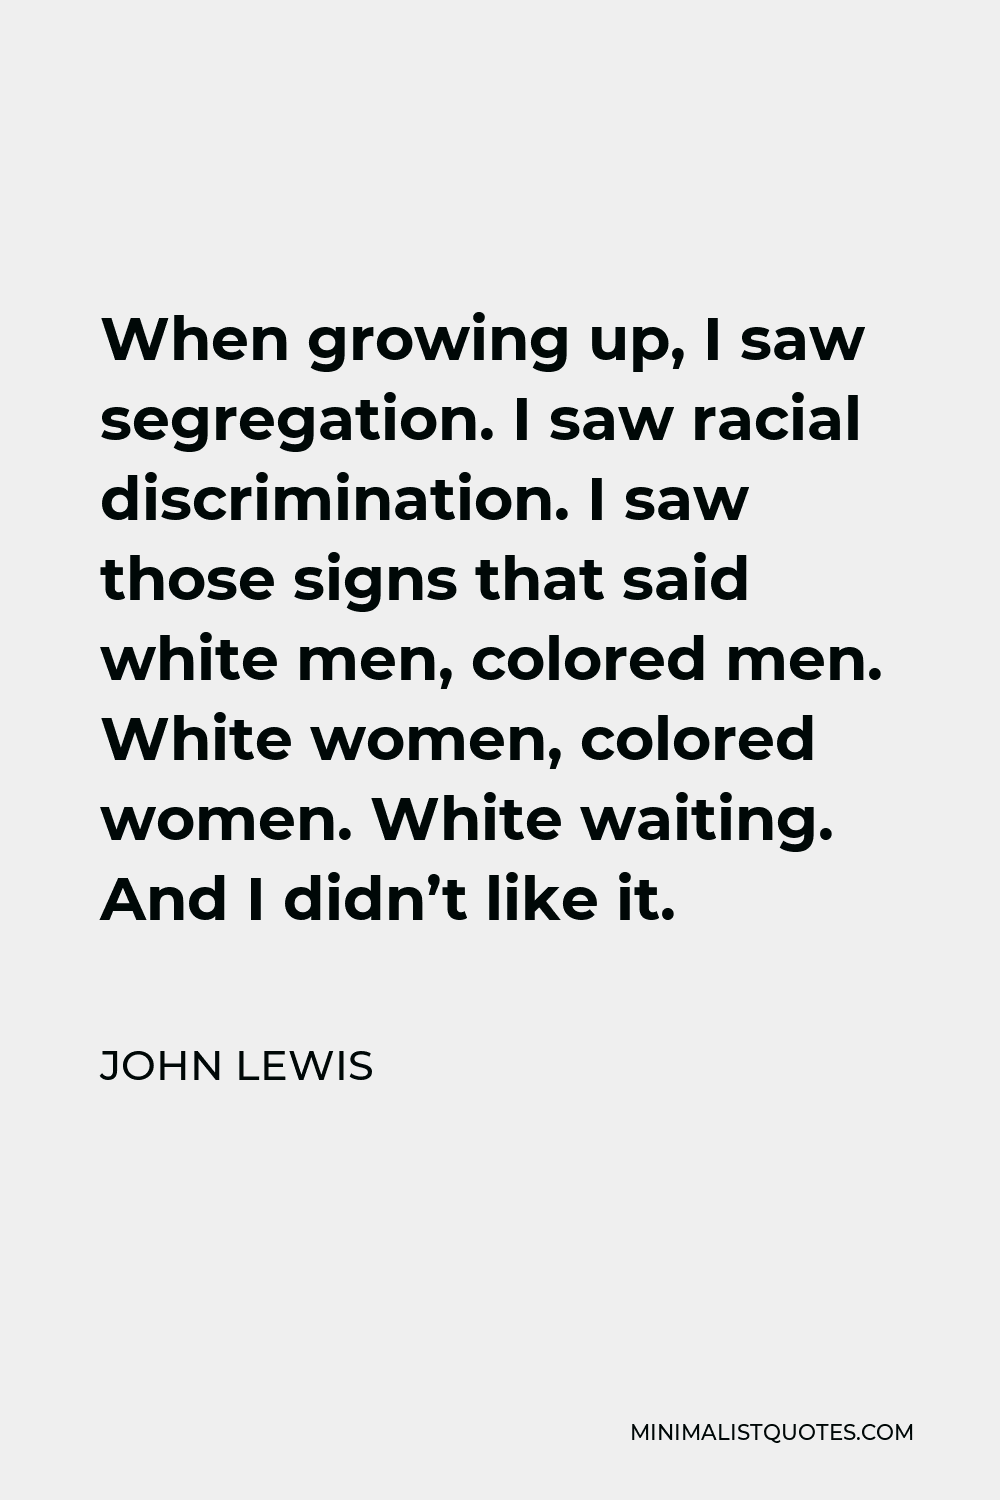 John Lewis Quote - When growing up, I saw segregation. I saw racial discrimination. I saw those signs that said white men, colored men. White women, colored women. White waiting. And I didn’t like it.